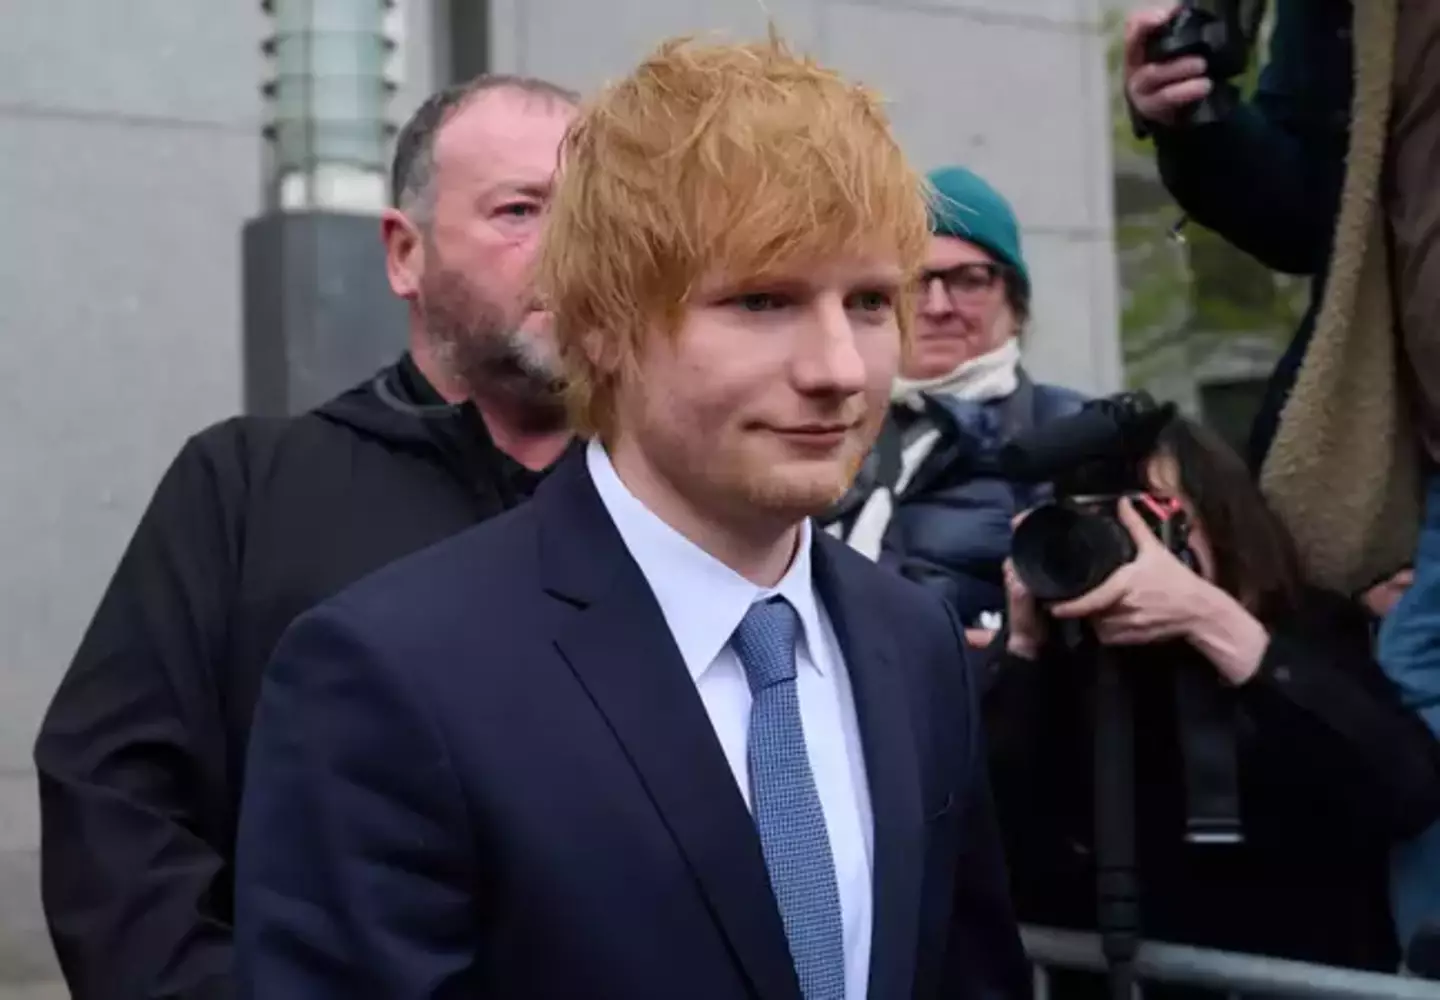 Ed Sheeran has insisted that he didn't plagiarise anyone's music.